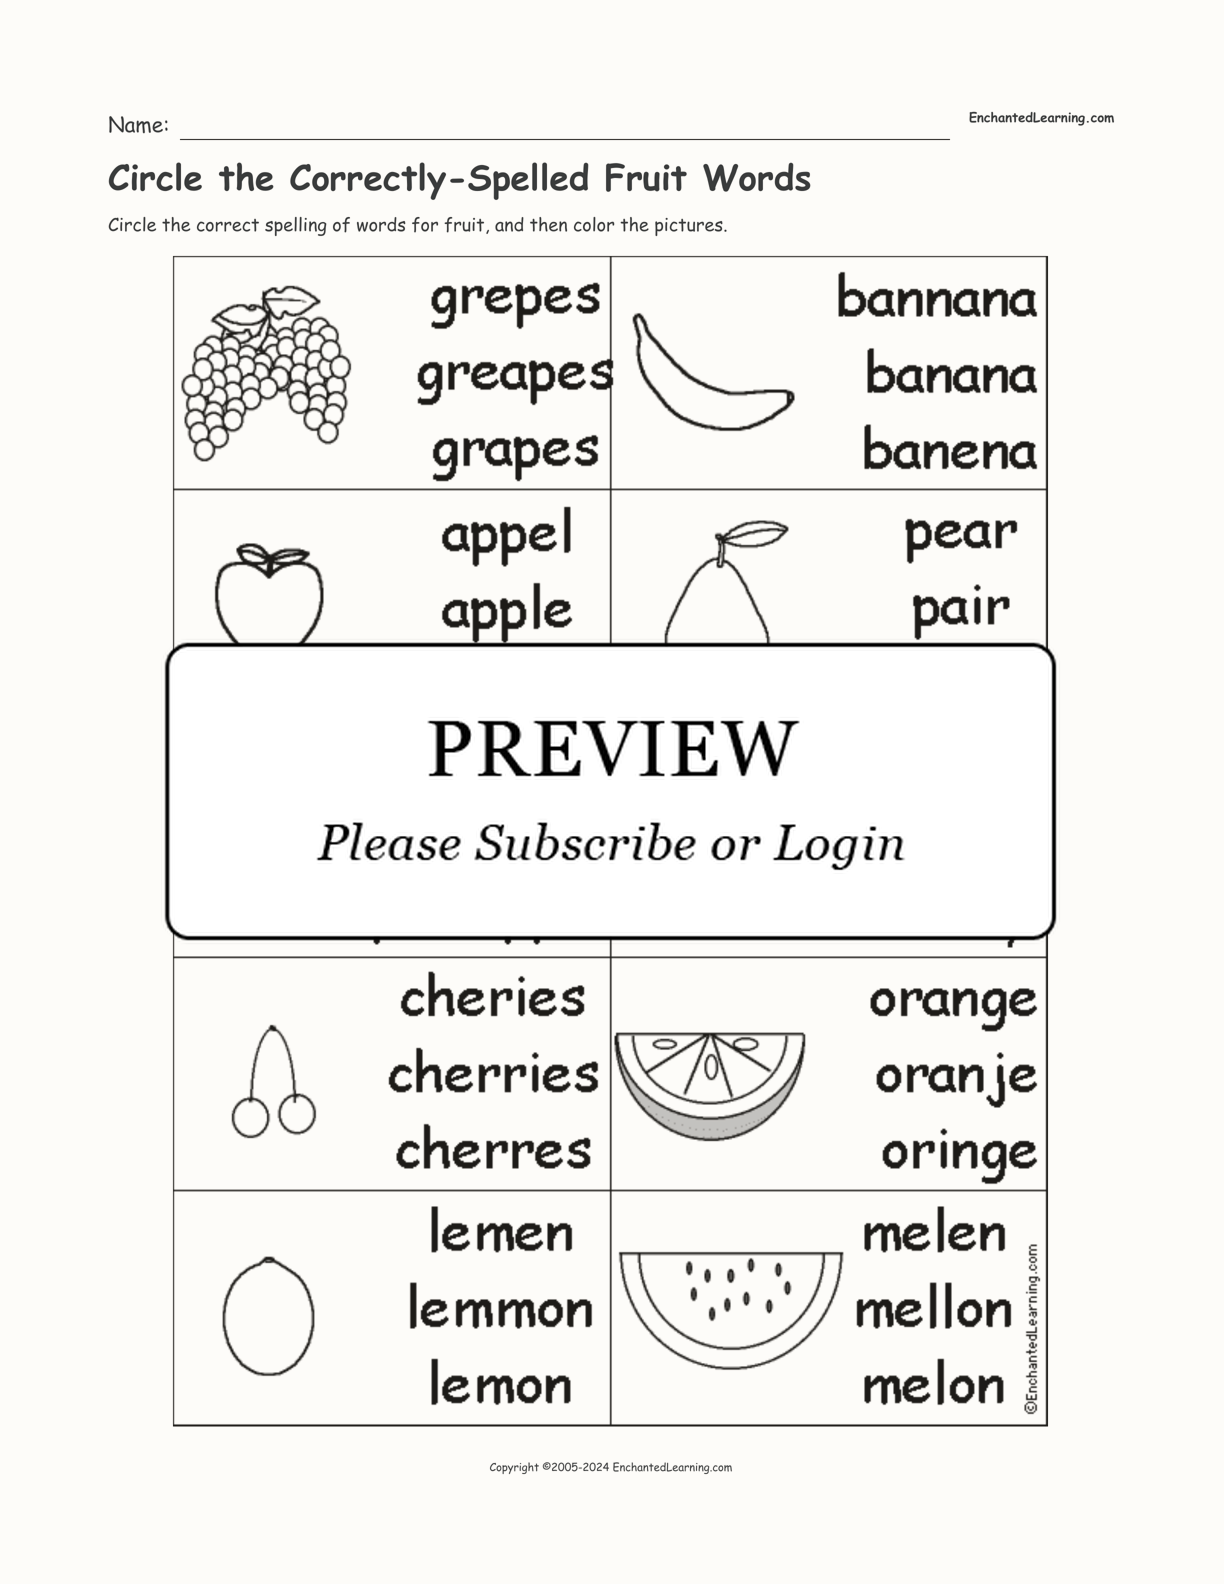 Circle the Correctly-Spelled Fruit Words interactive worksheet page 1